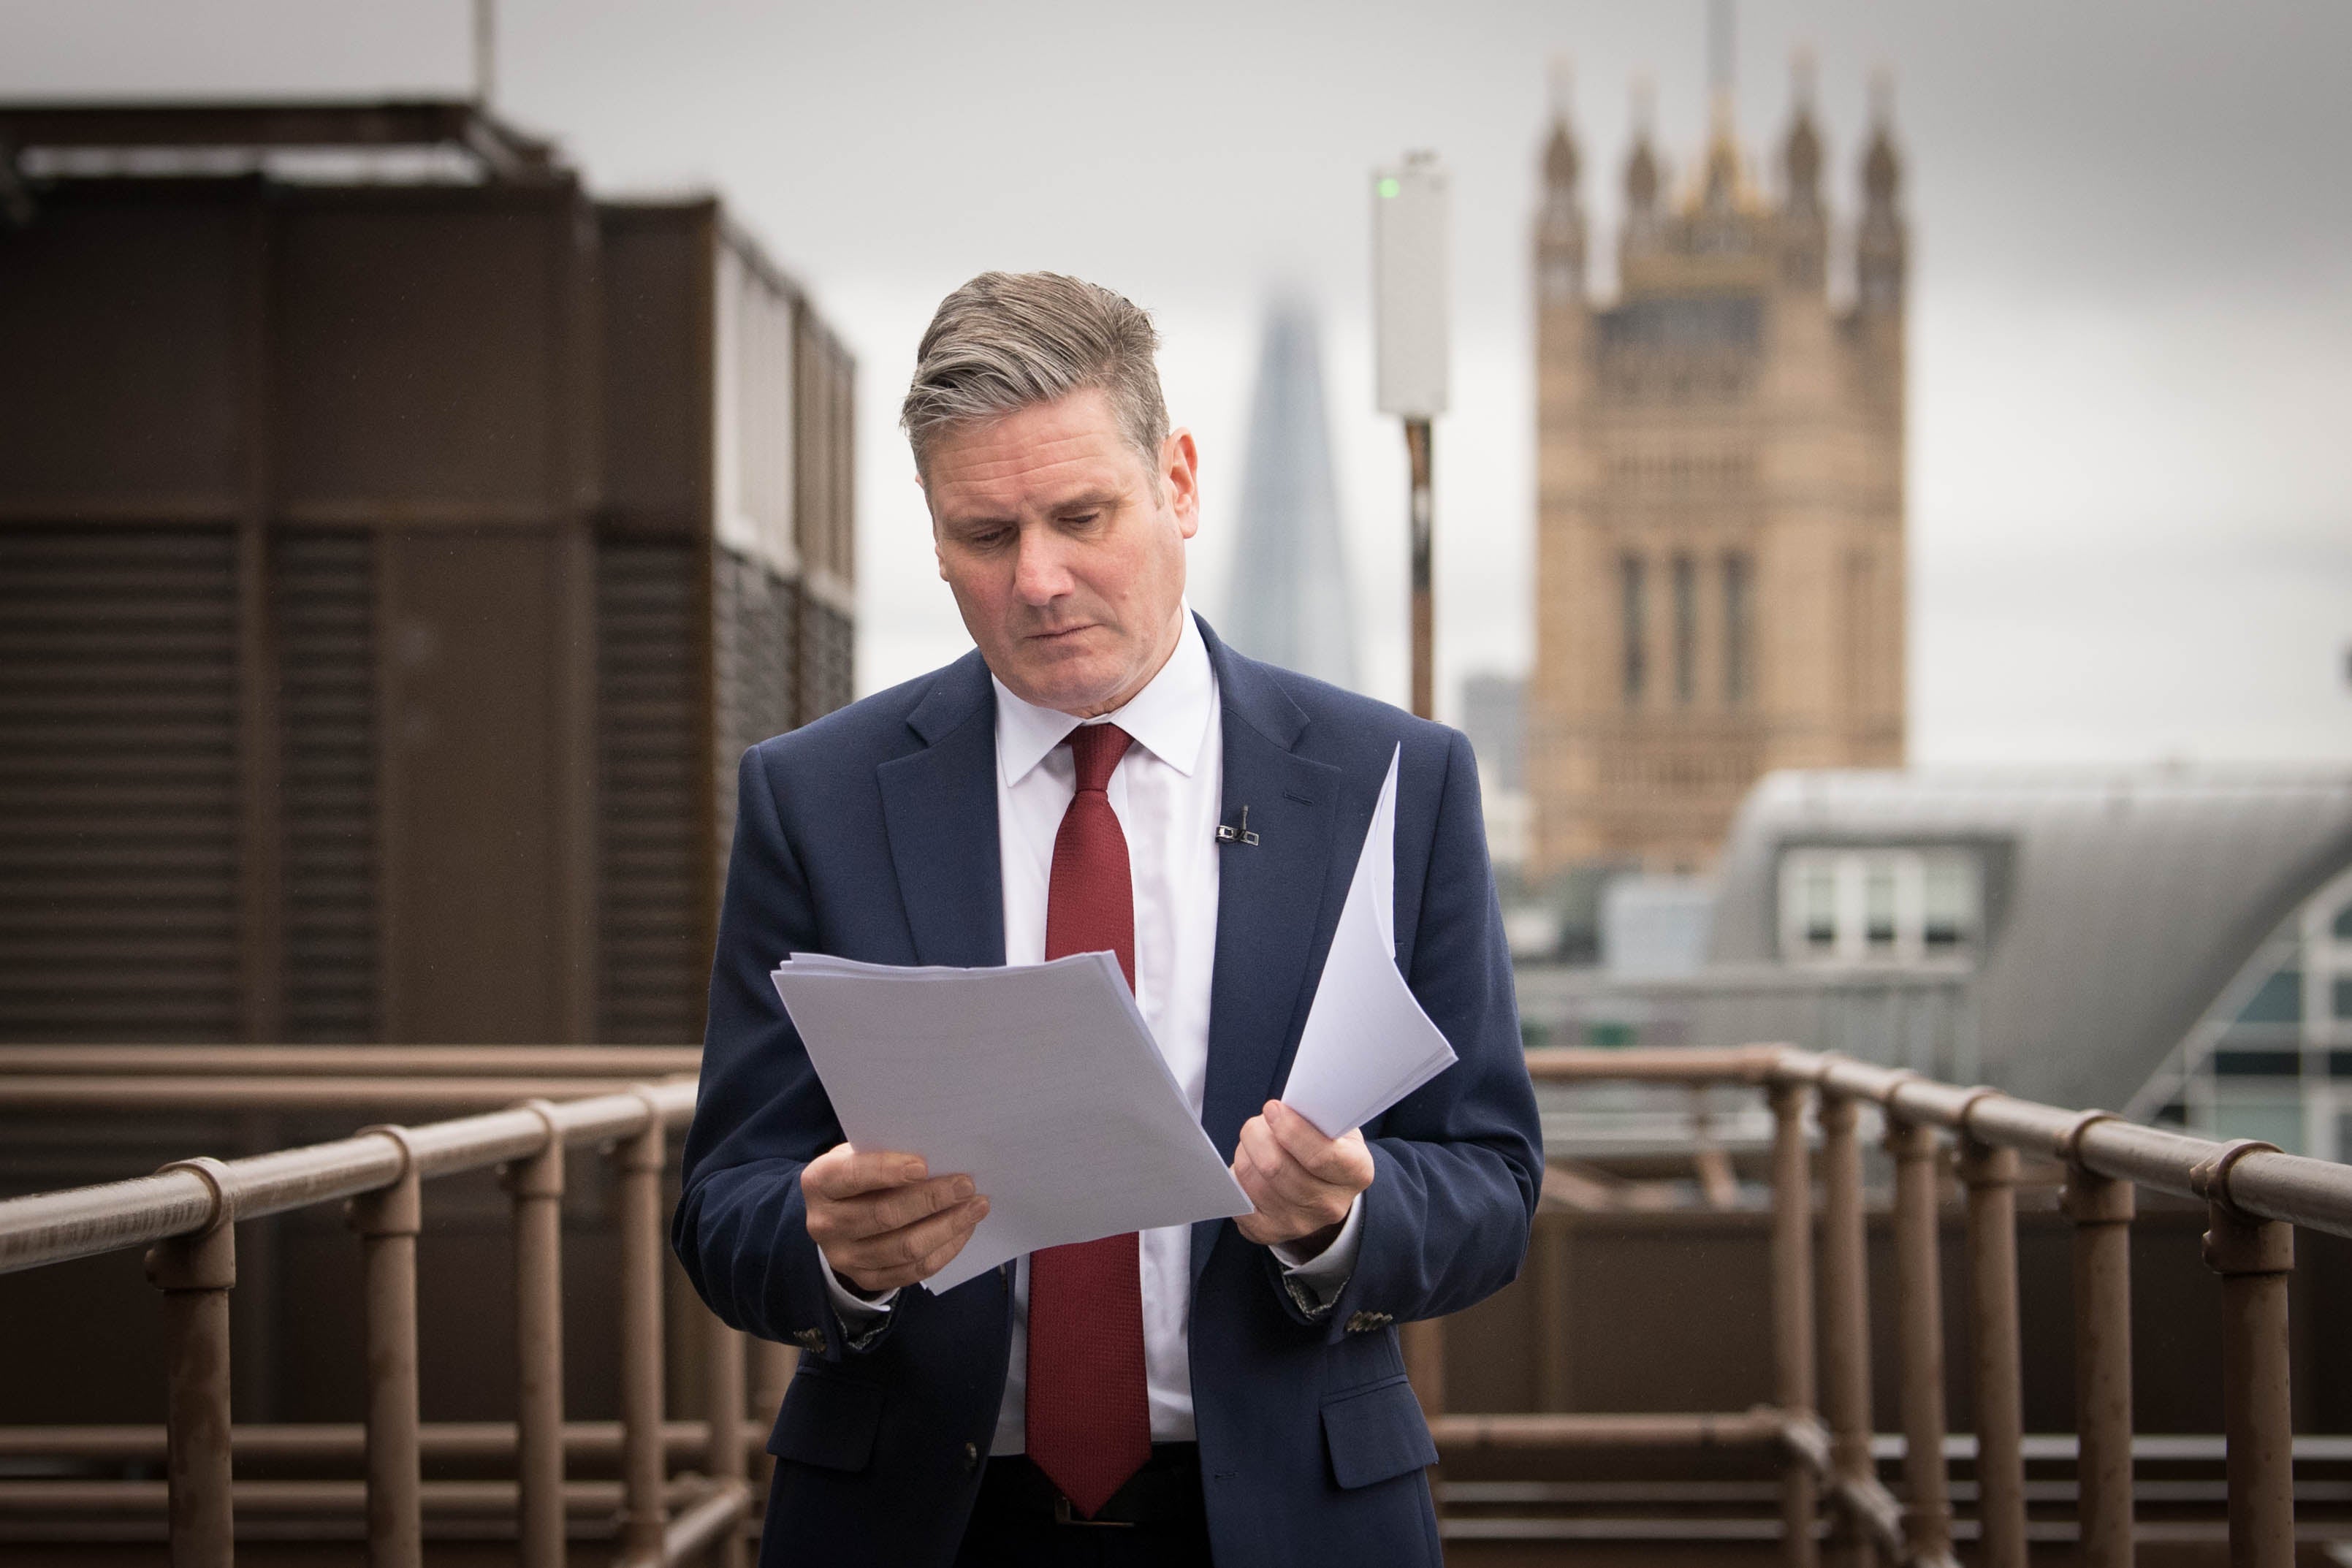 Keir Starmer sparked criticism by ordering his MPs to back the agreement – on the grounds that a no-deal Brexit is the only alternative